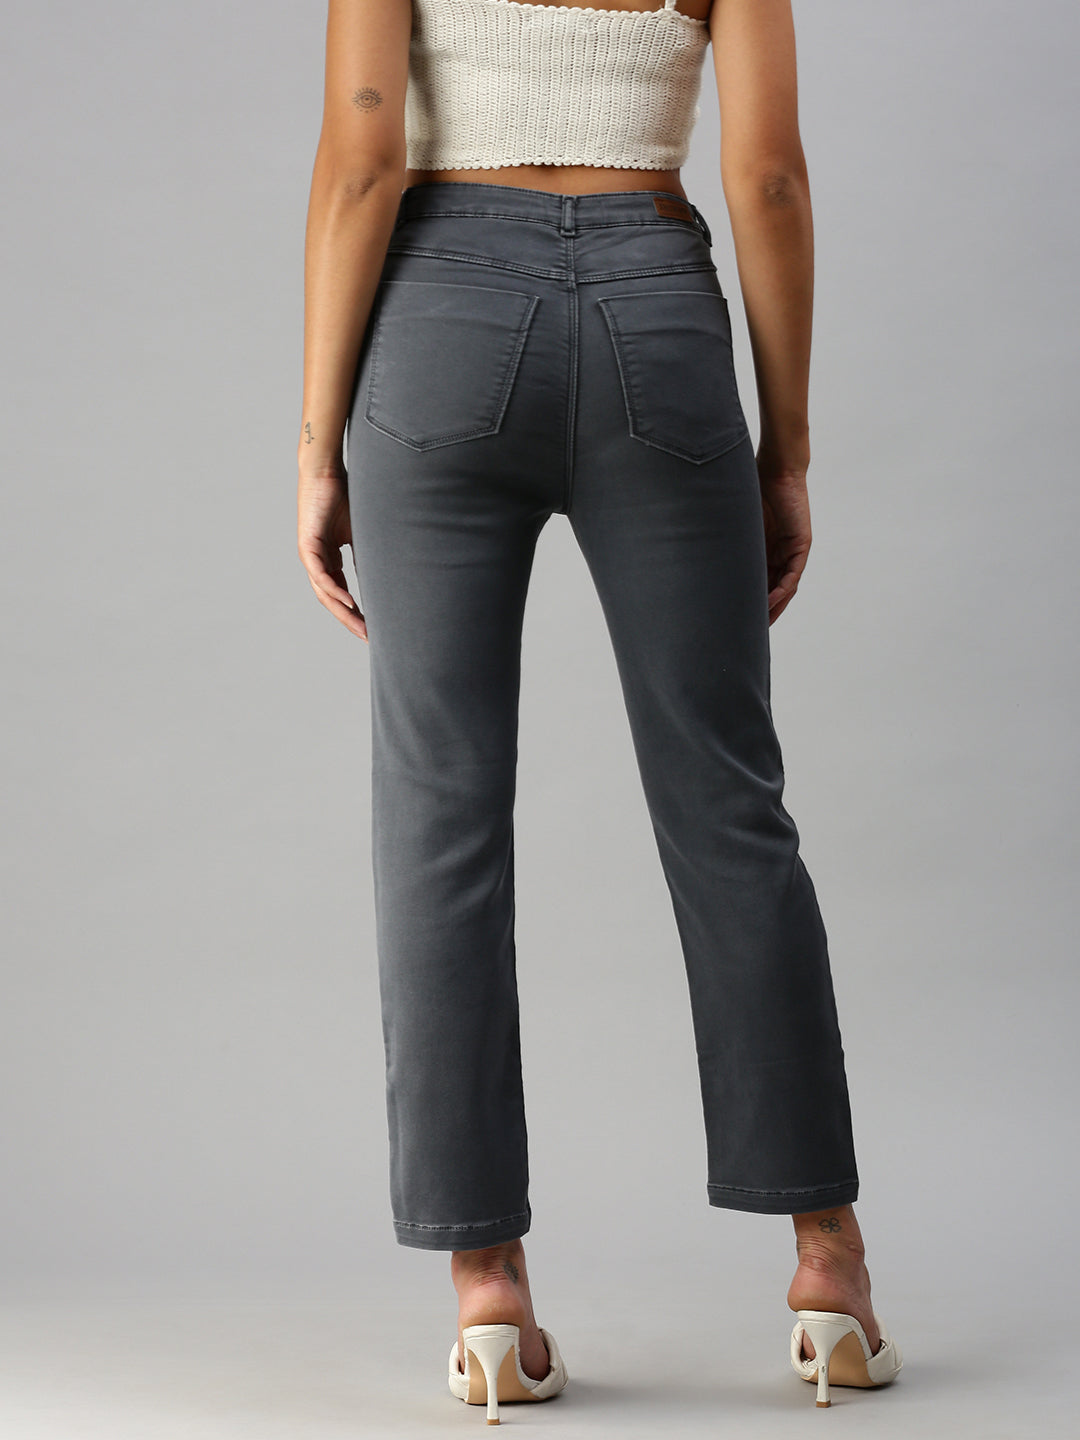 Women's Grey Solid Straight Fit Denim Jeans